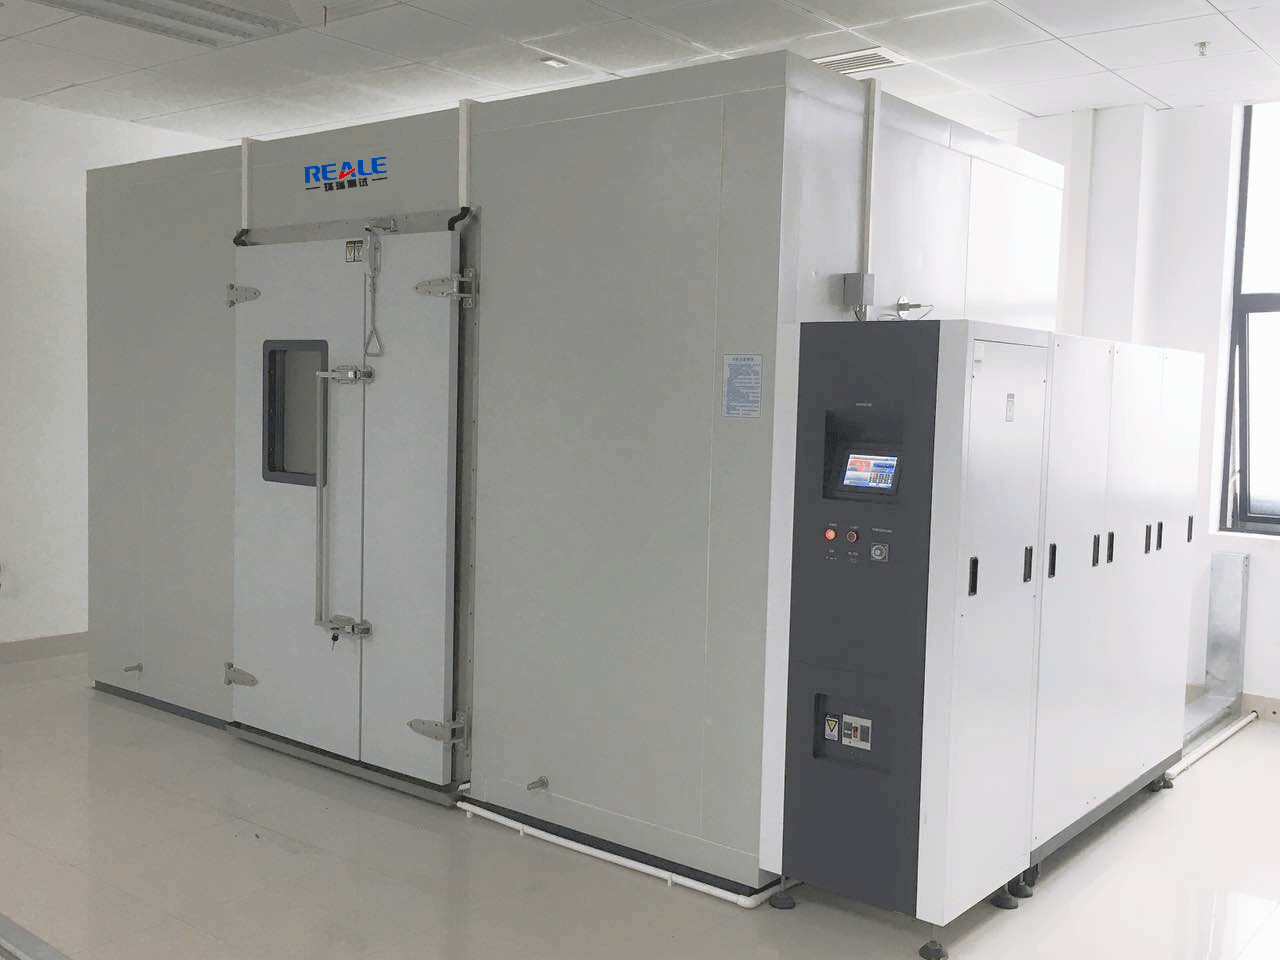 Customized high quality walk-in climate chamber enviromental chamber temp and humidity test chamber